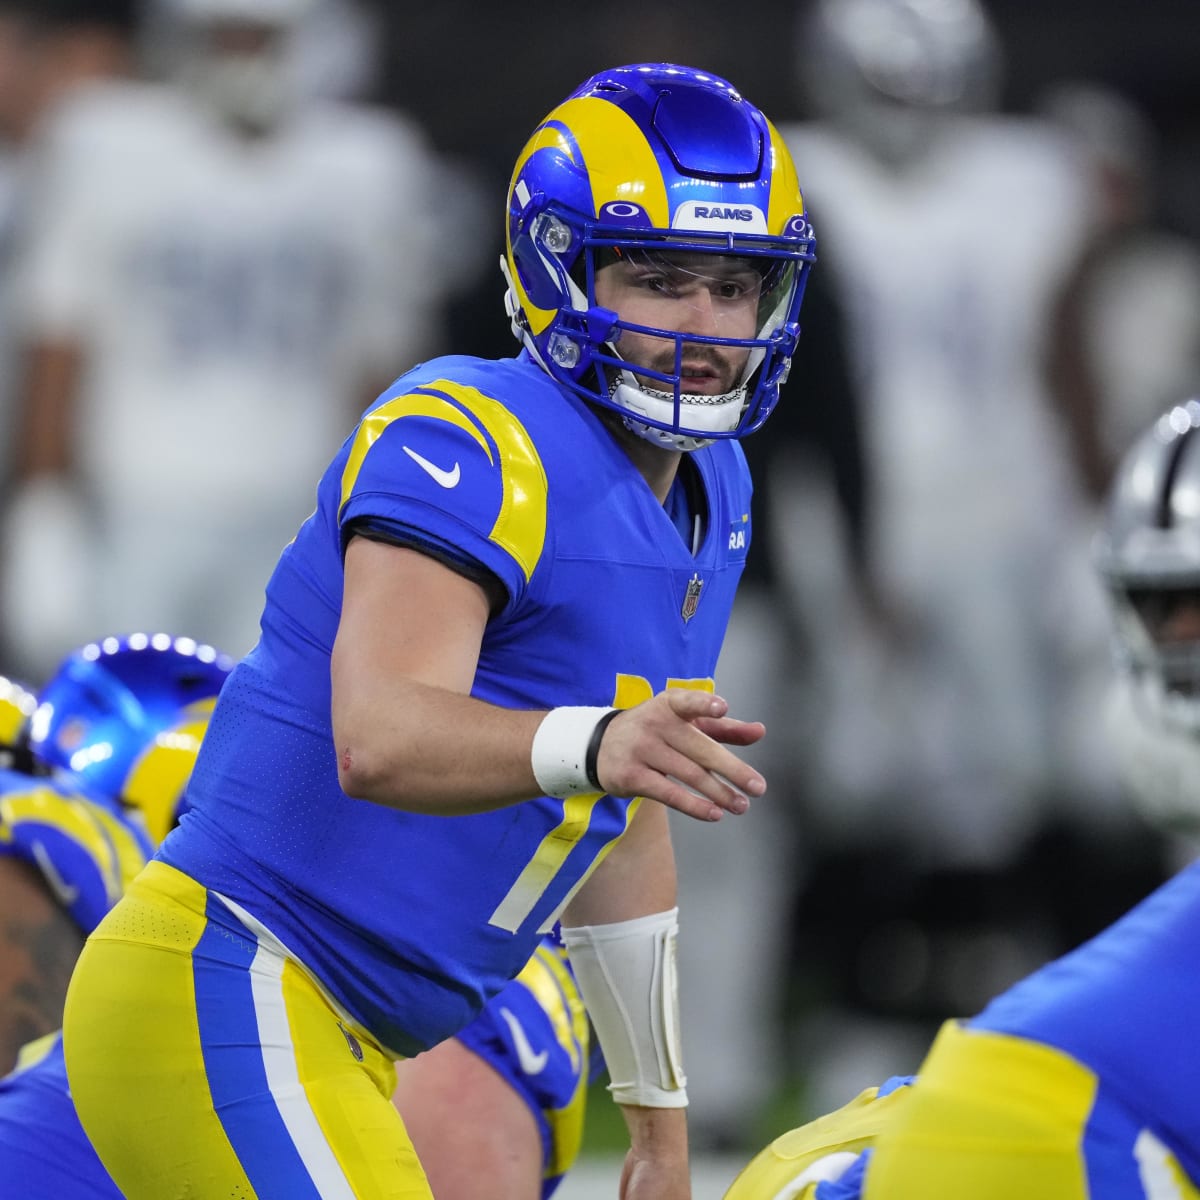 Los Angeles Rams - Thank you, Baker Mayfield! 👏